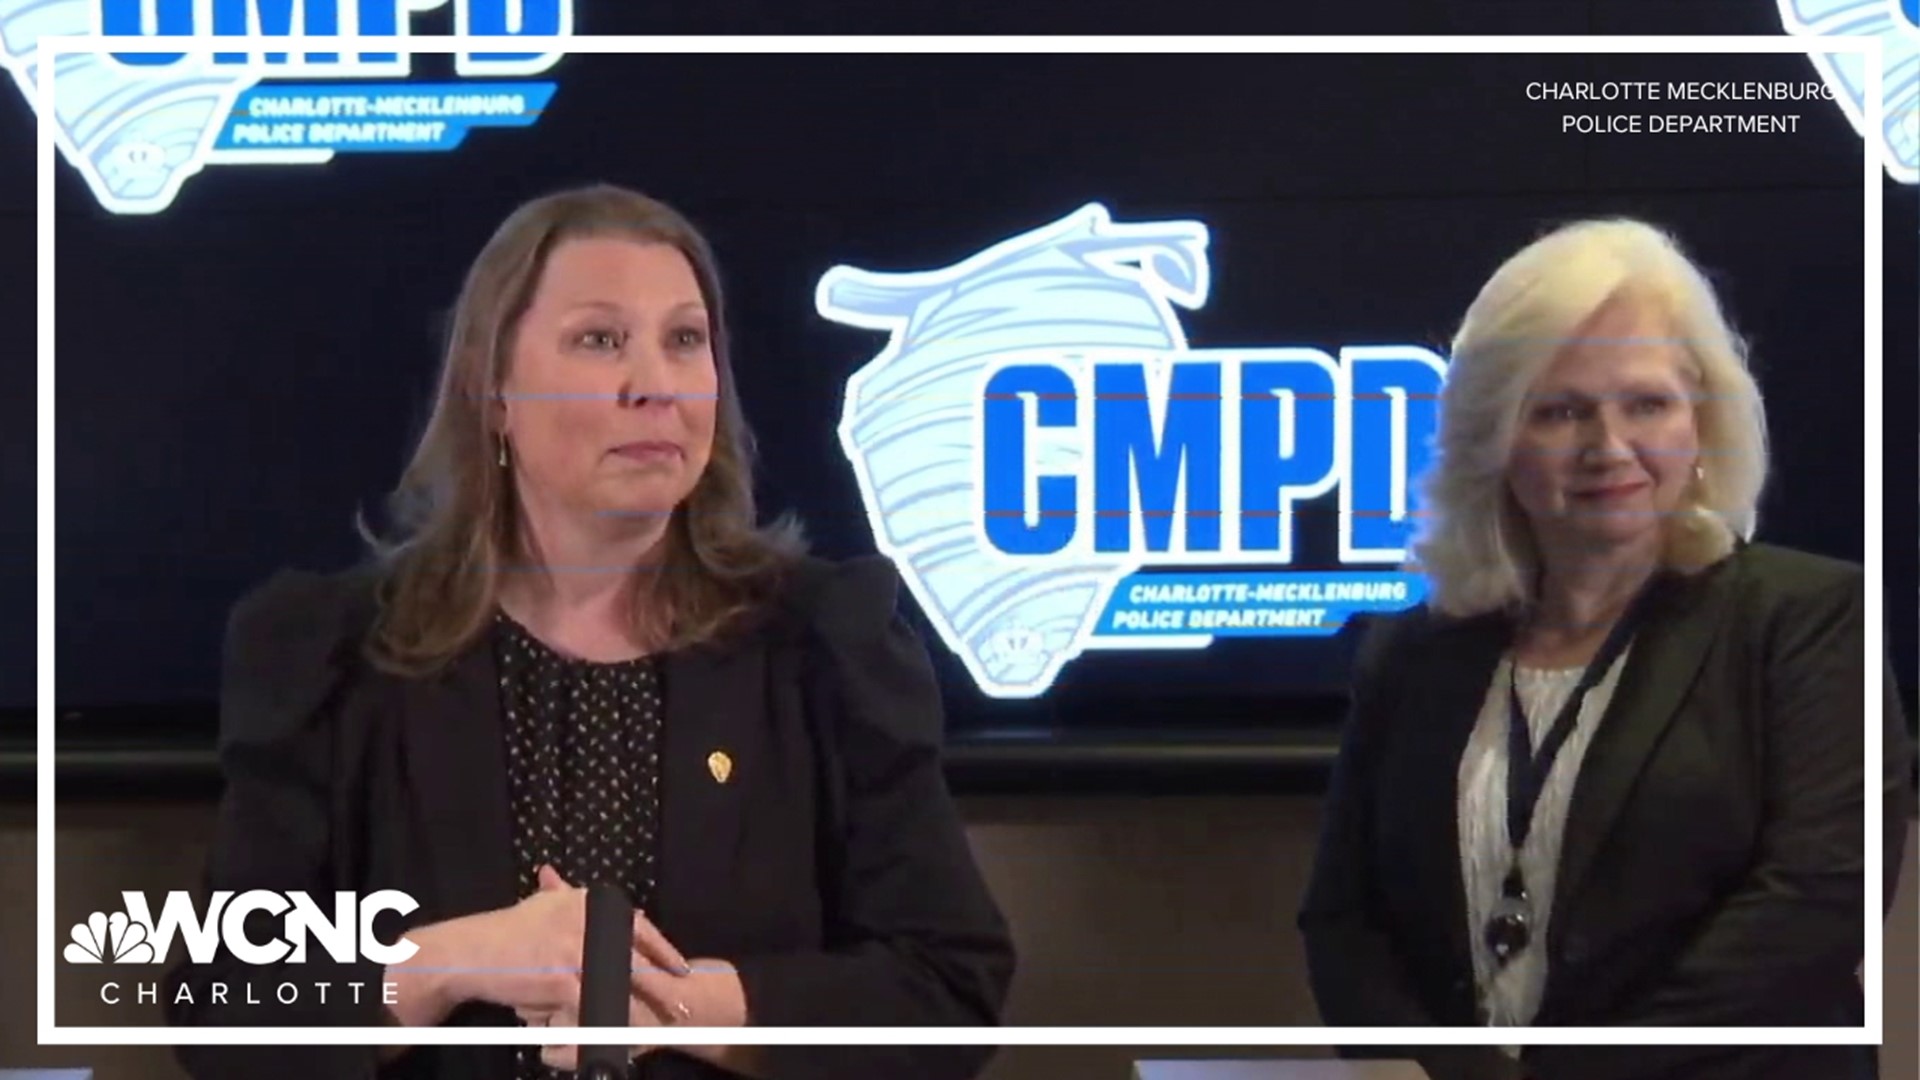 CMPD celebrates International Women's Day by launching a campaign to recruit more women to join the force.